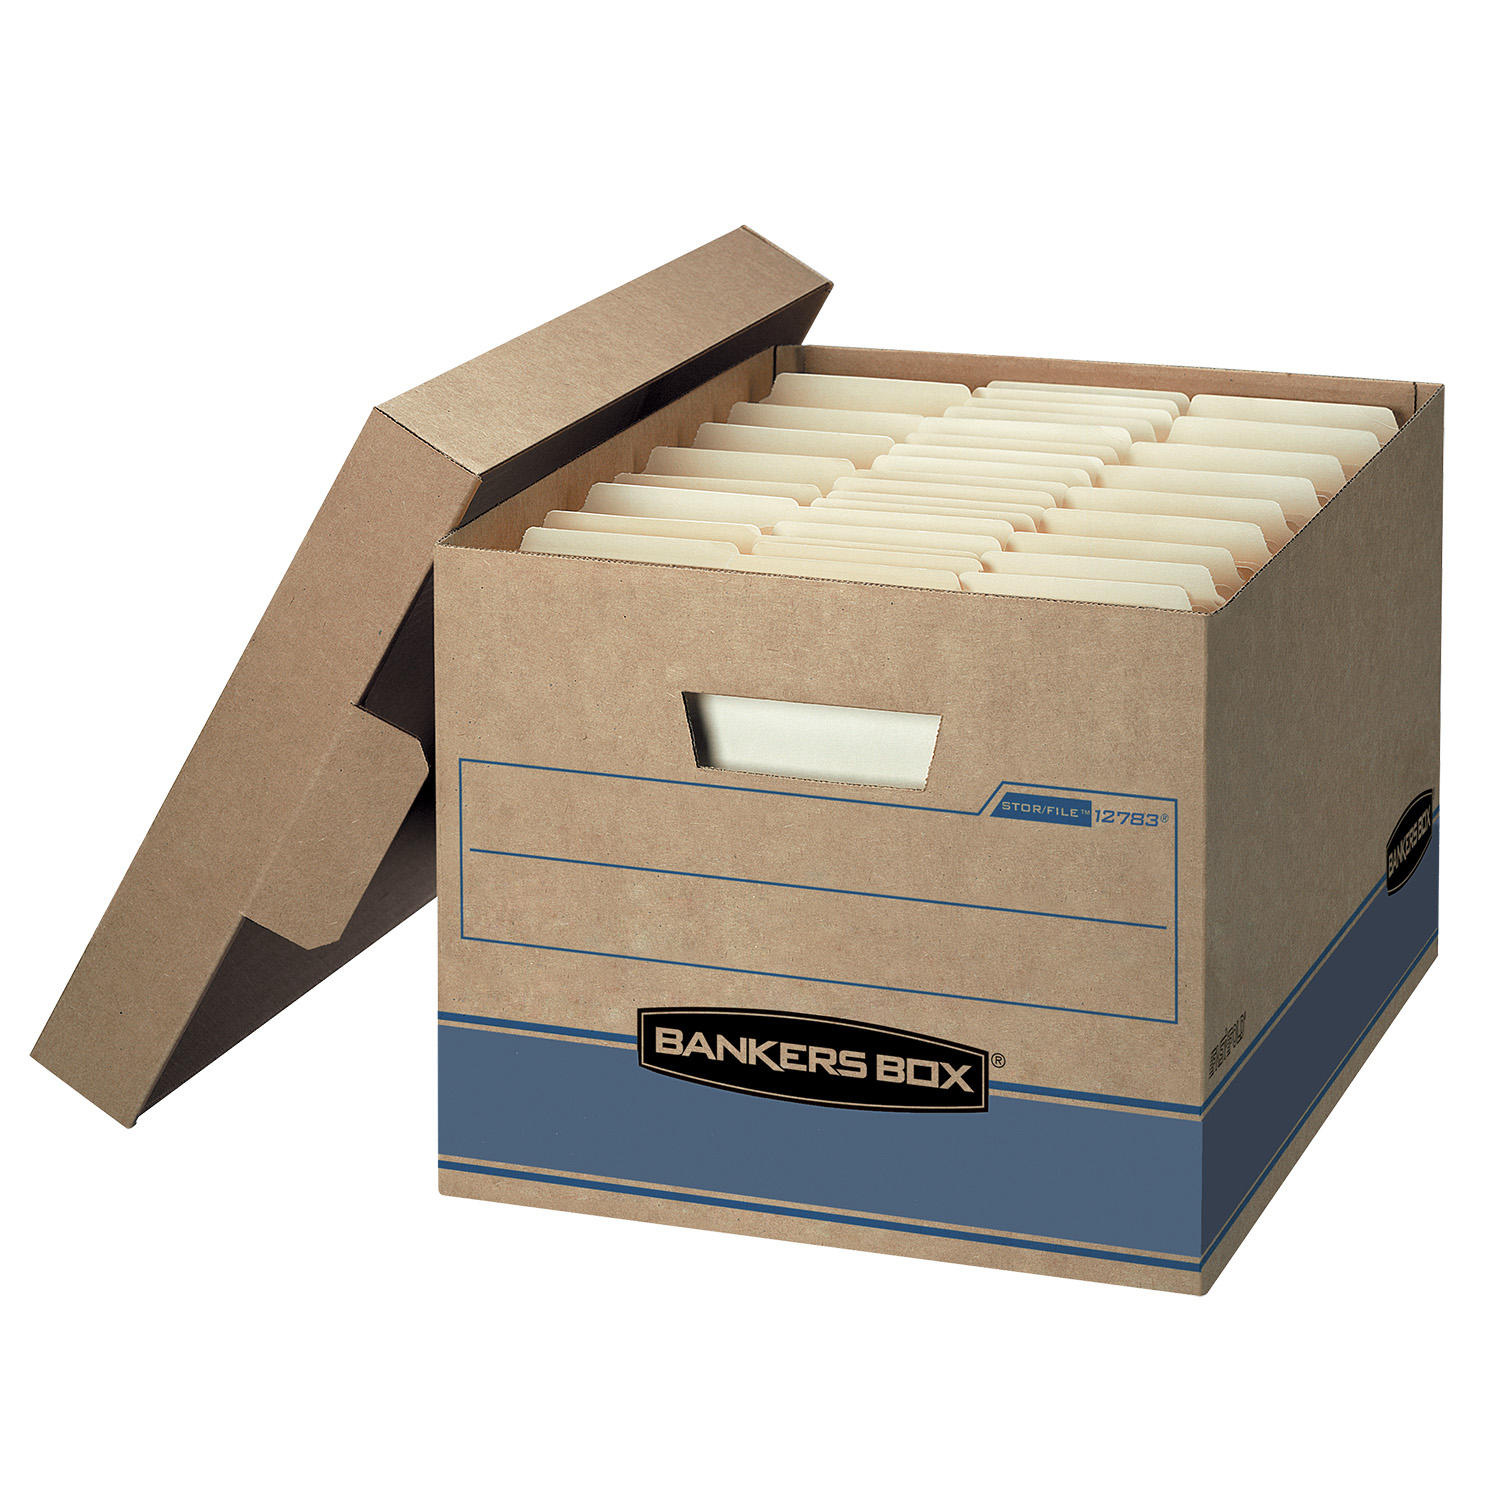 Bankers Box Heavy Duty Storage Boxes, 10' X 12' X 15' (10 Pack), Kraft Brown and White